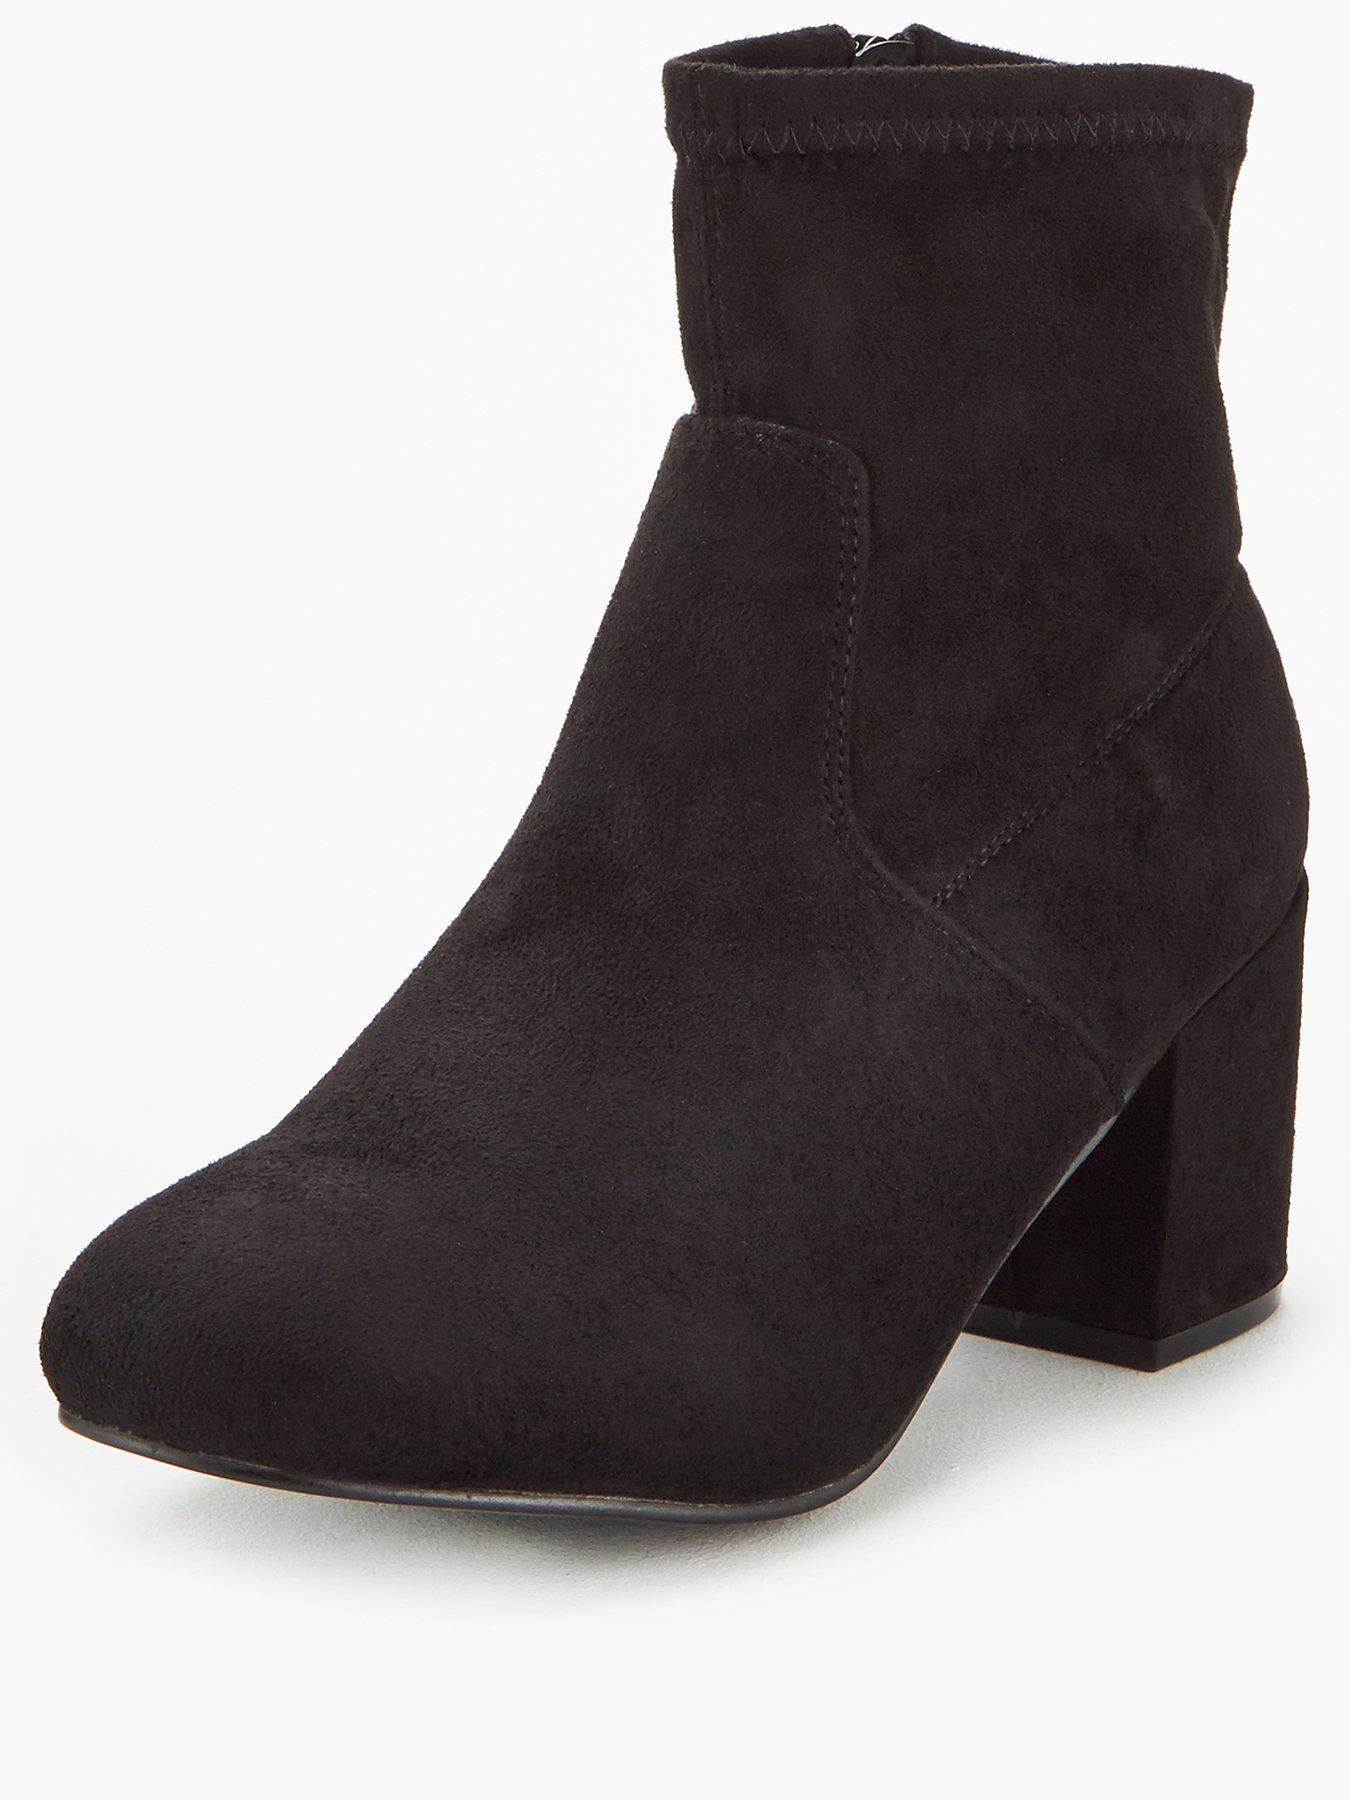 flat ankle boots ireland